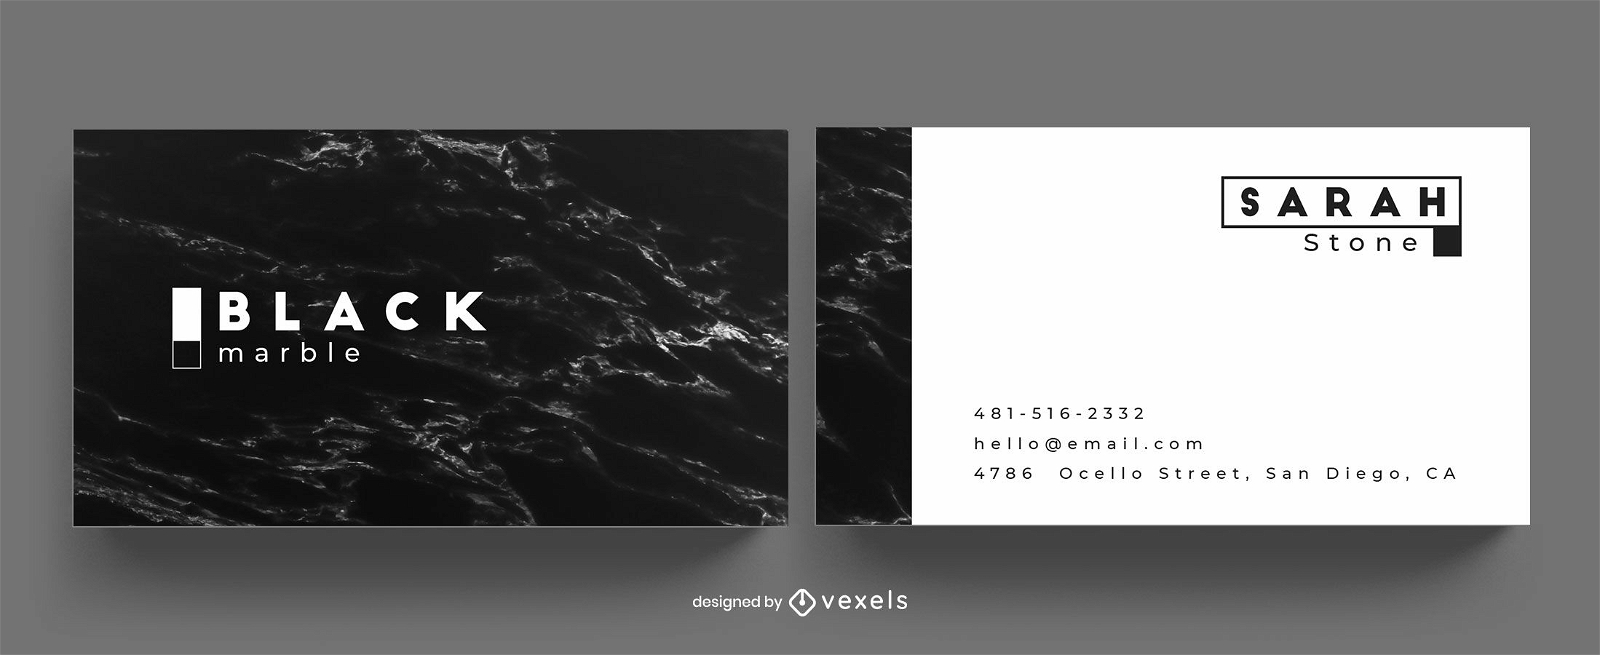 Black marble business card template